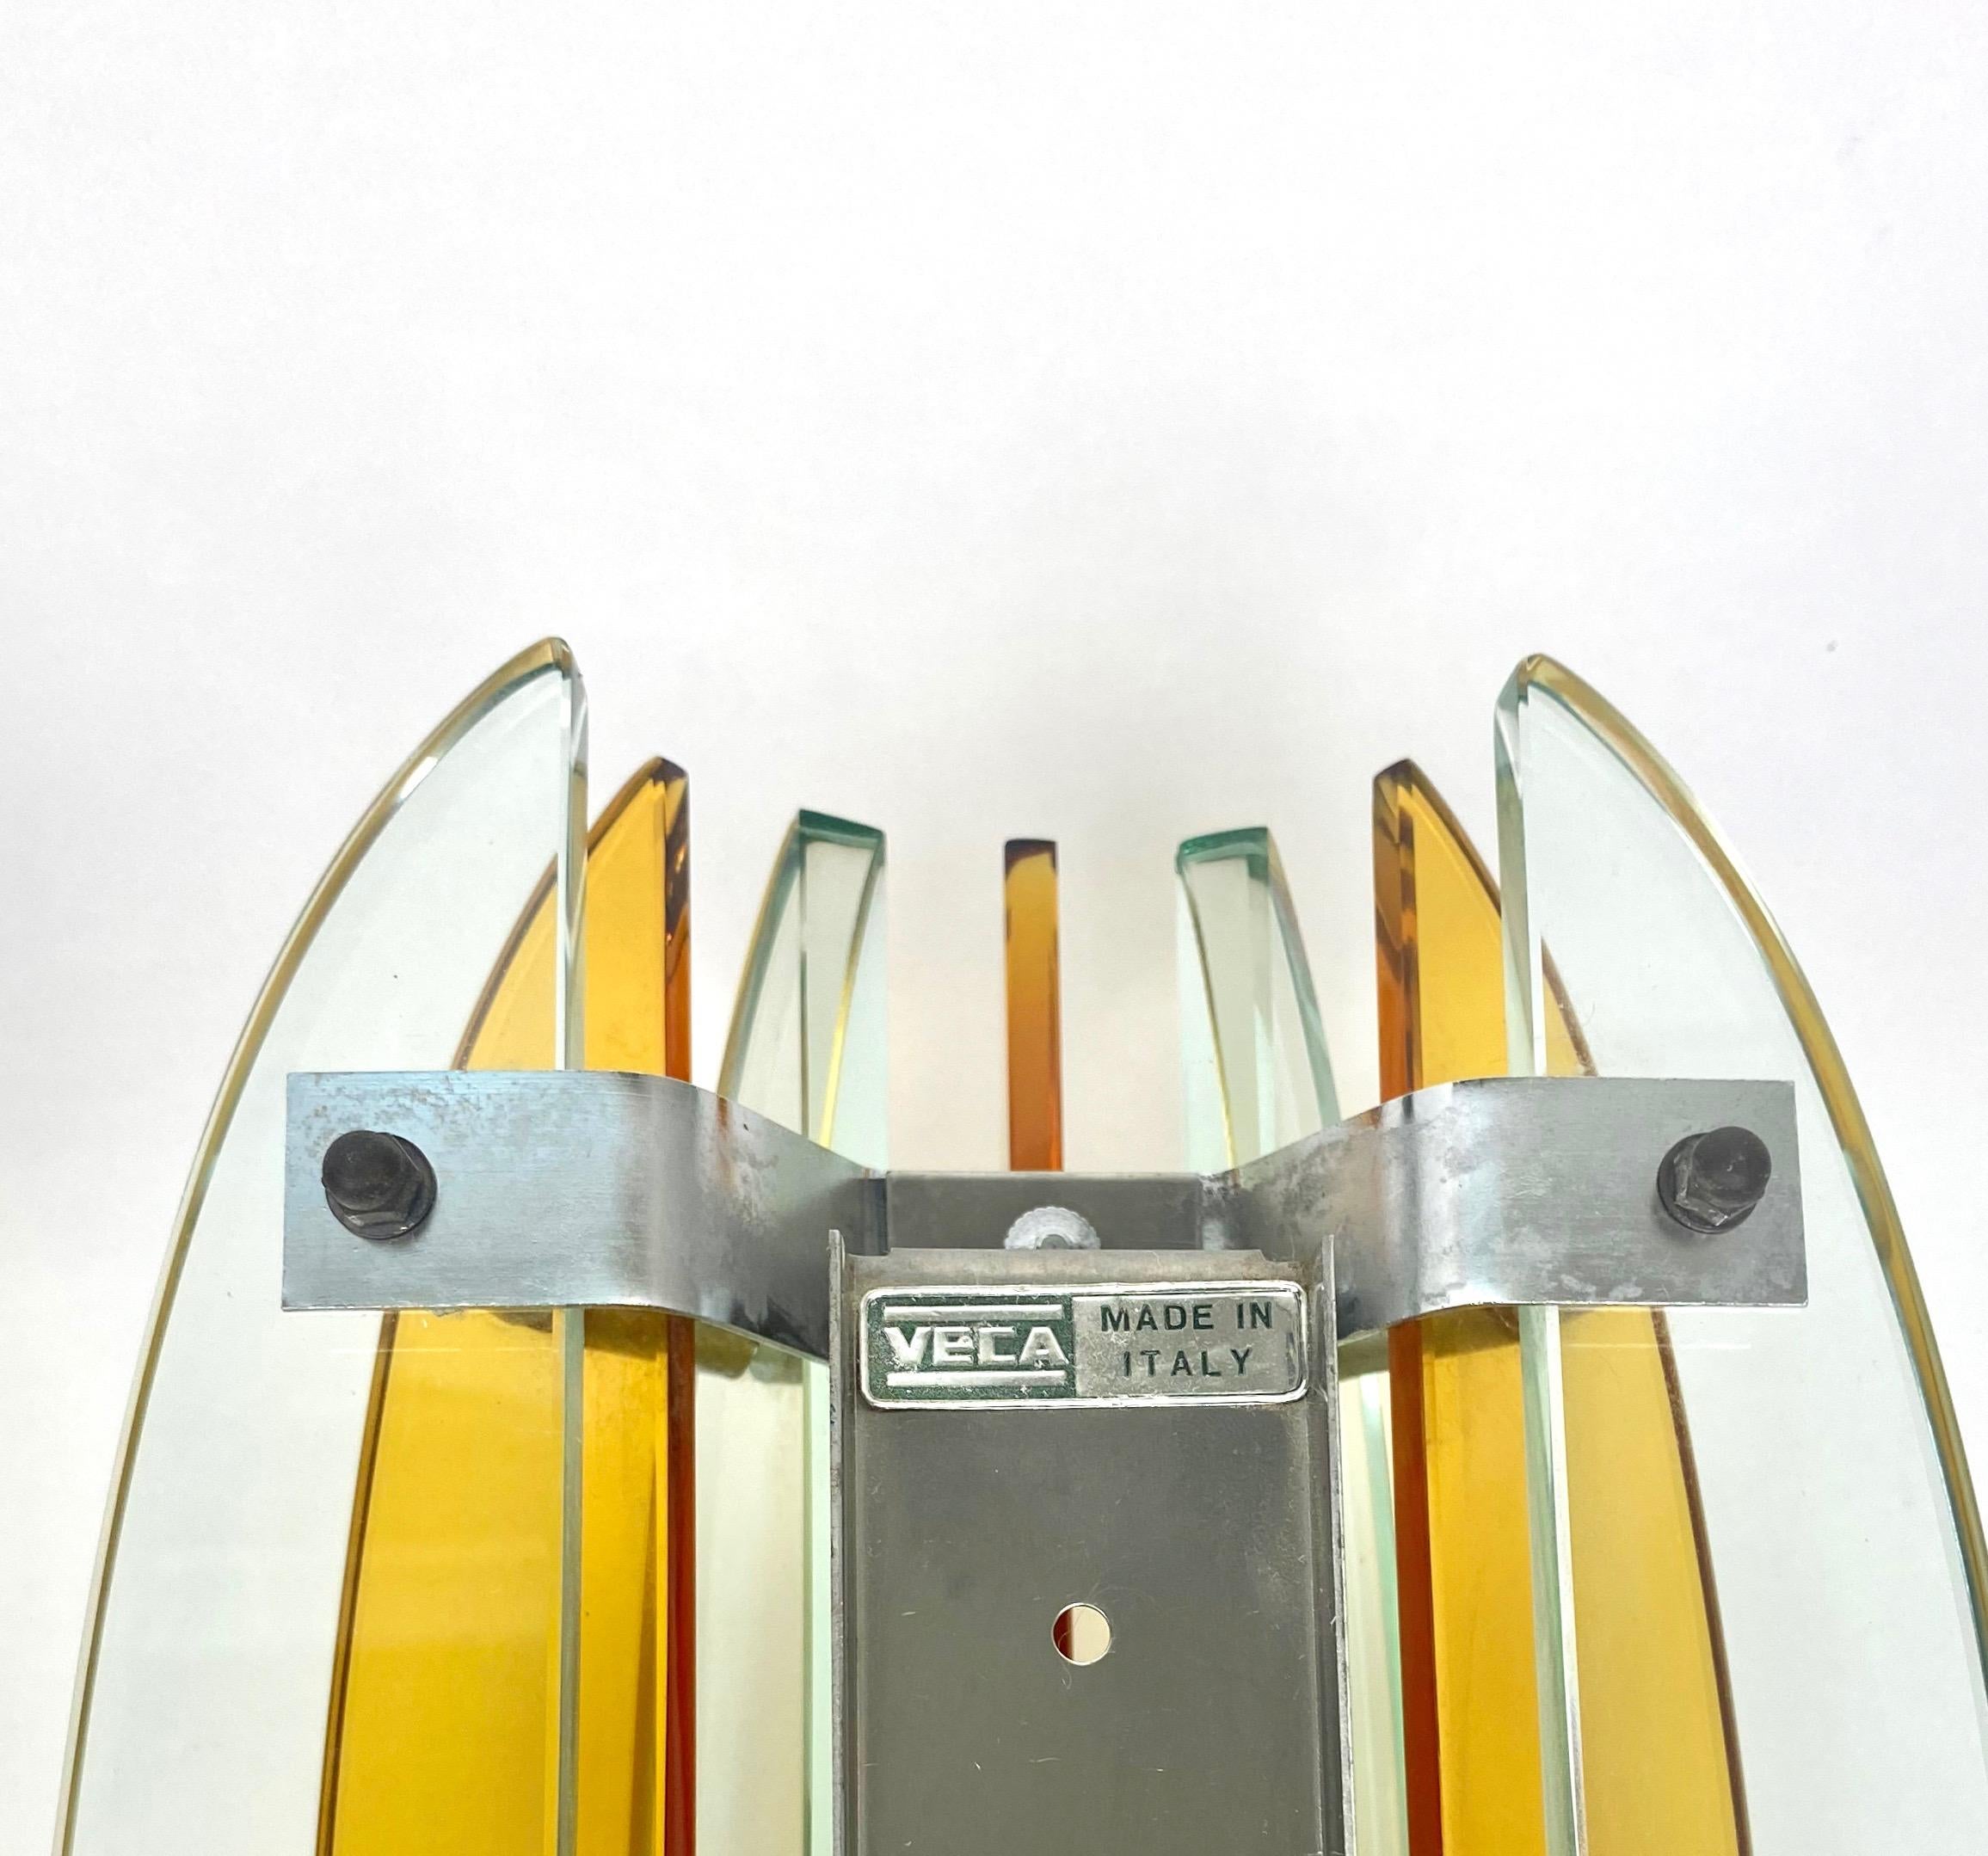 Late 20th Century Pair of Wall Sconces in Colored Glass and Chrome by Veca, Italy, 1970s